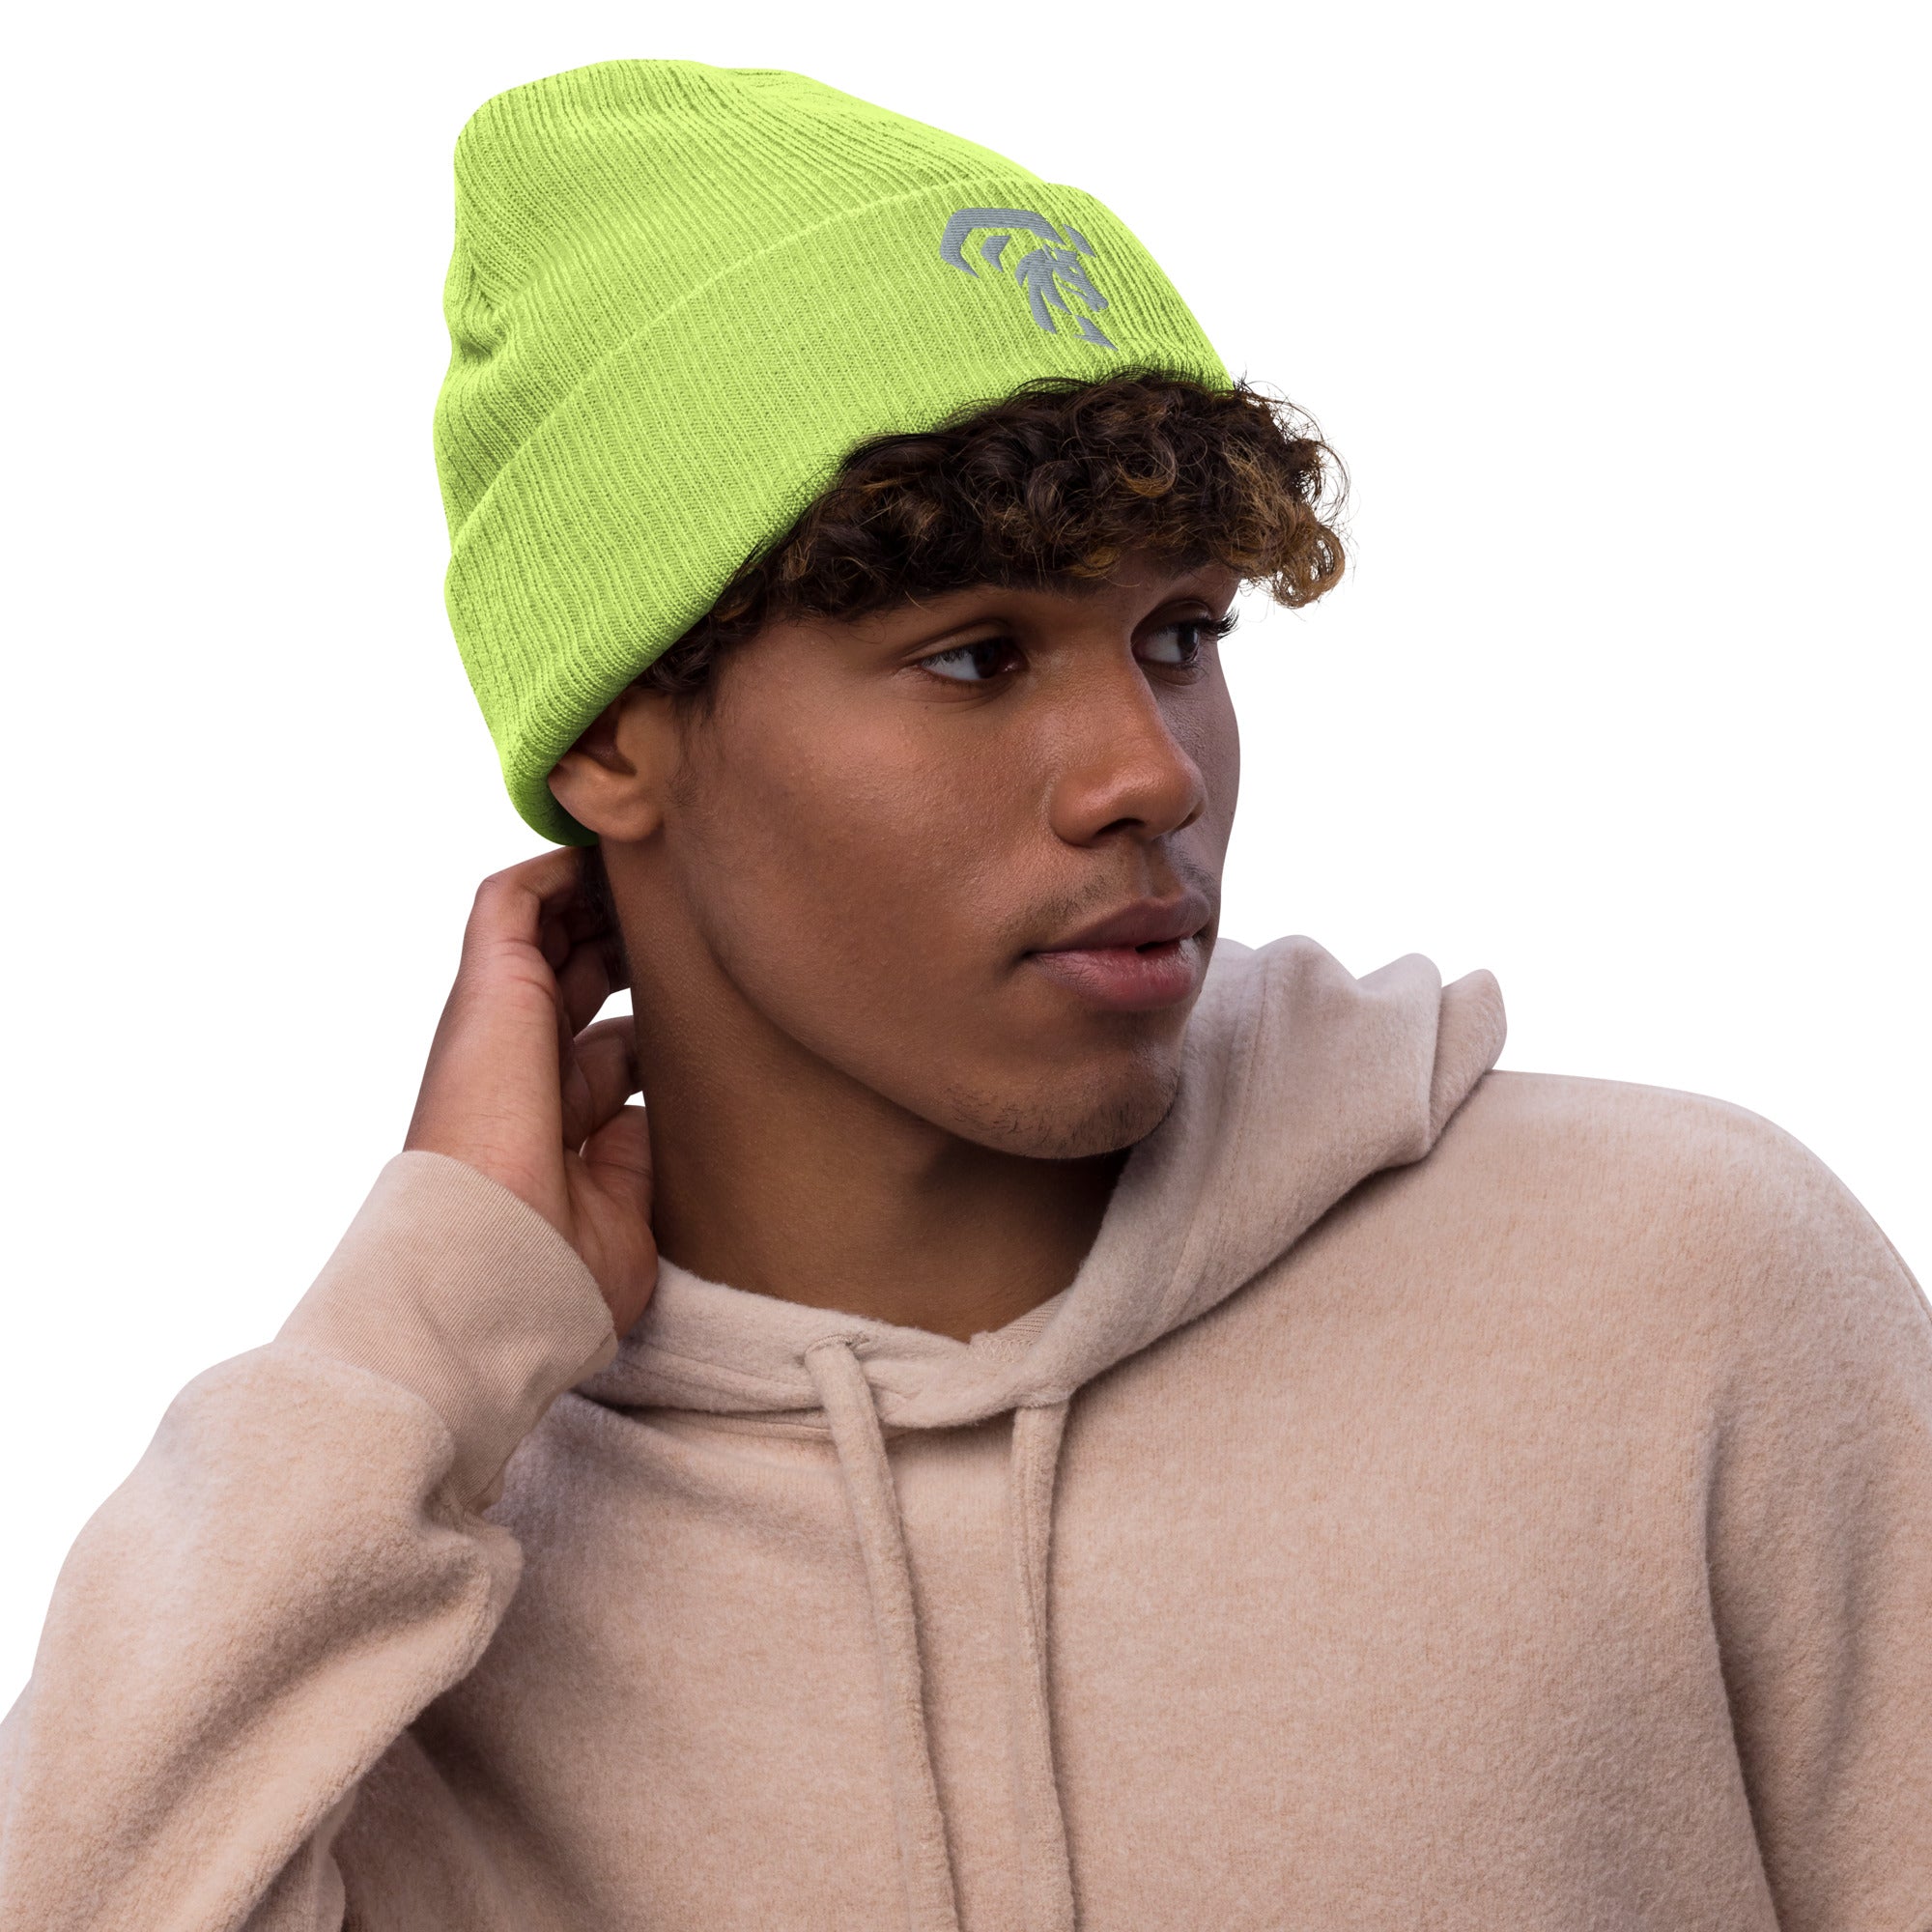 Unisex Ribbed Knit Beanie: Filly Style for Fashion and Warmth